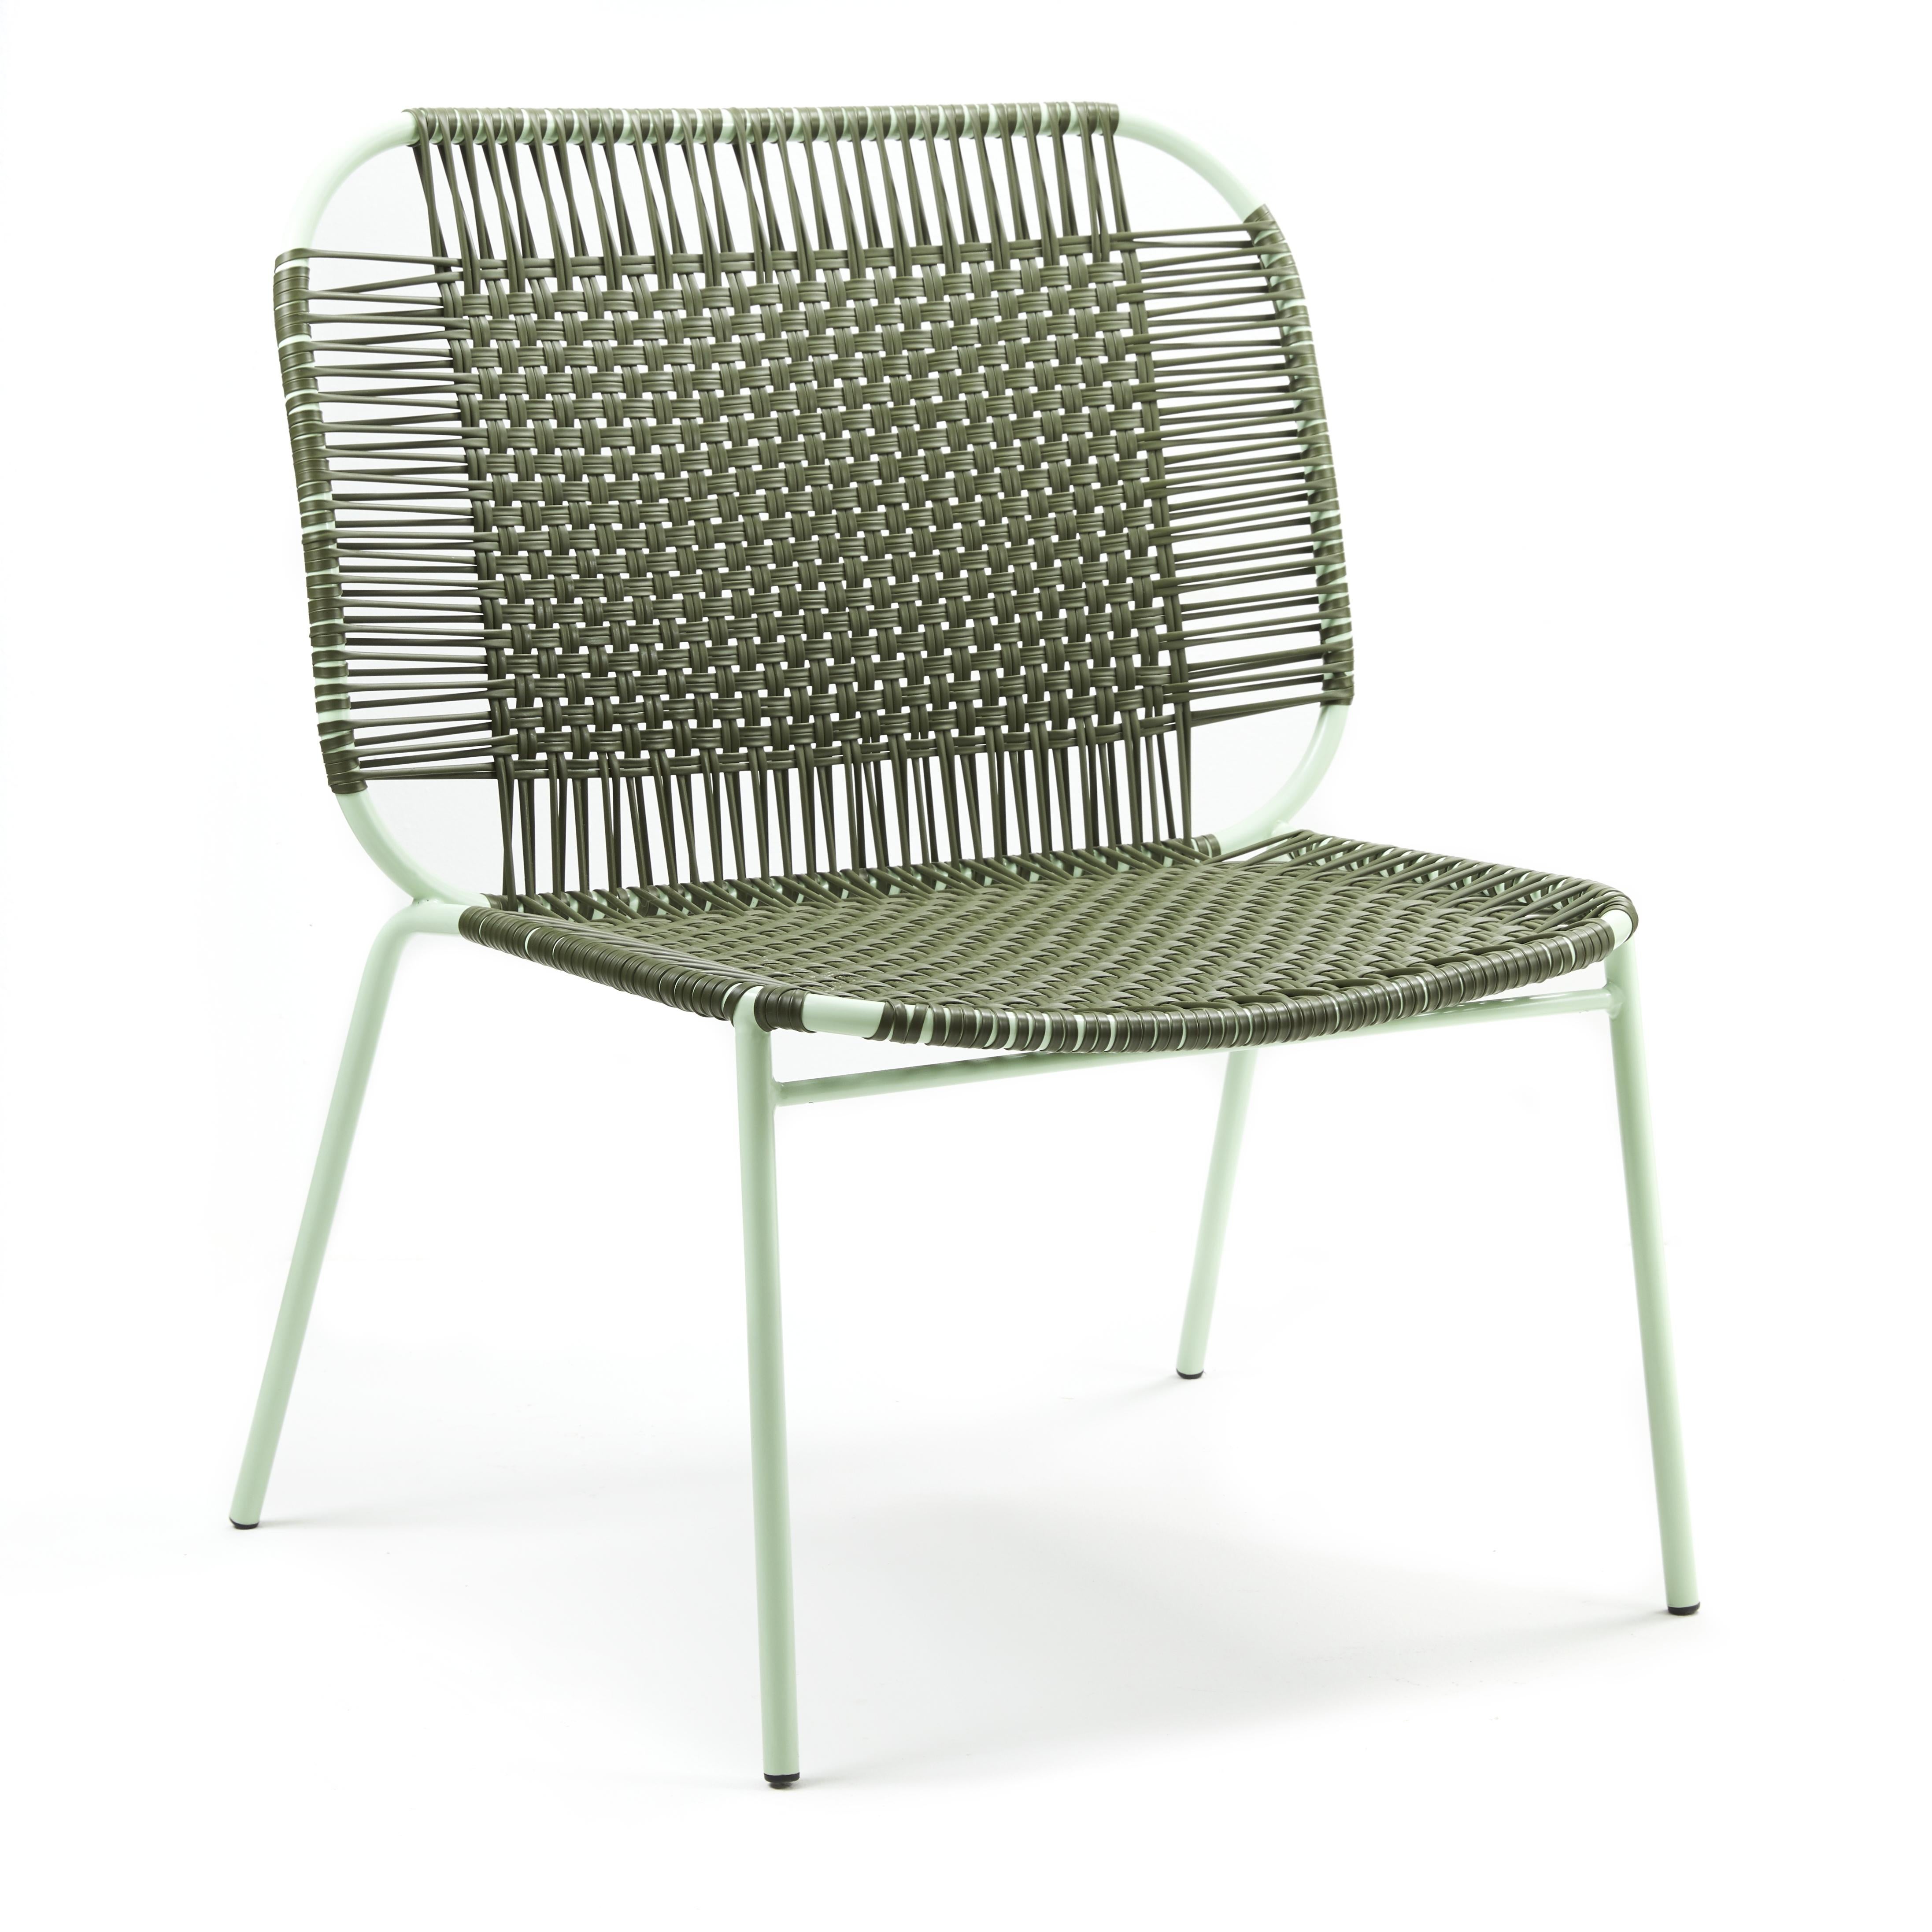 Set of 2 olive Cielo lounge low chair by Sebastian Herkner
Materials: Galvanized and powder-coated tubular steel. PVC strings are made from recycled plastic.
Technique: Made from recycled plastic and weaved by local craftspeople in Cartagena,